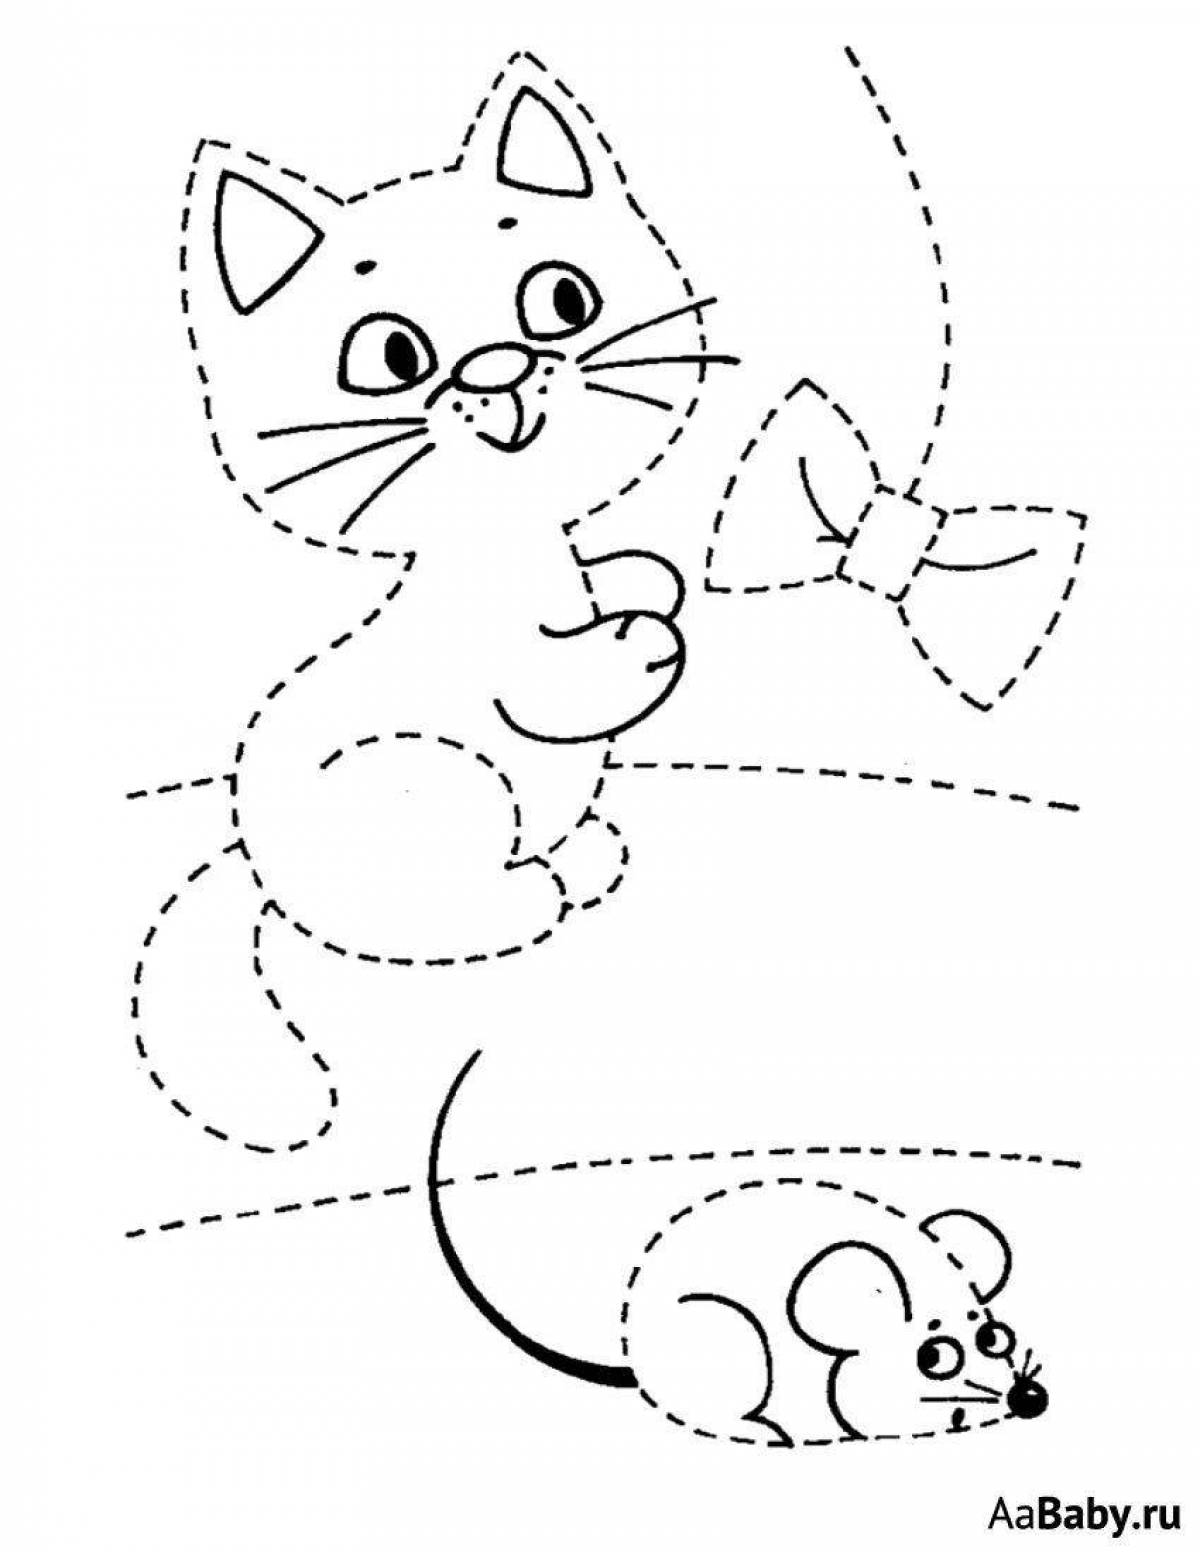 Coloring page of a sociable dotted cat